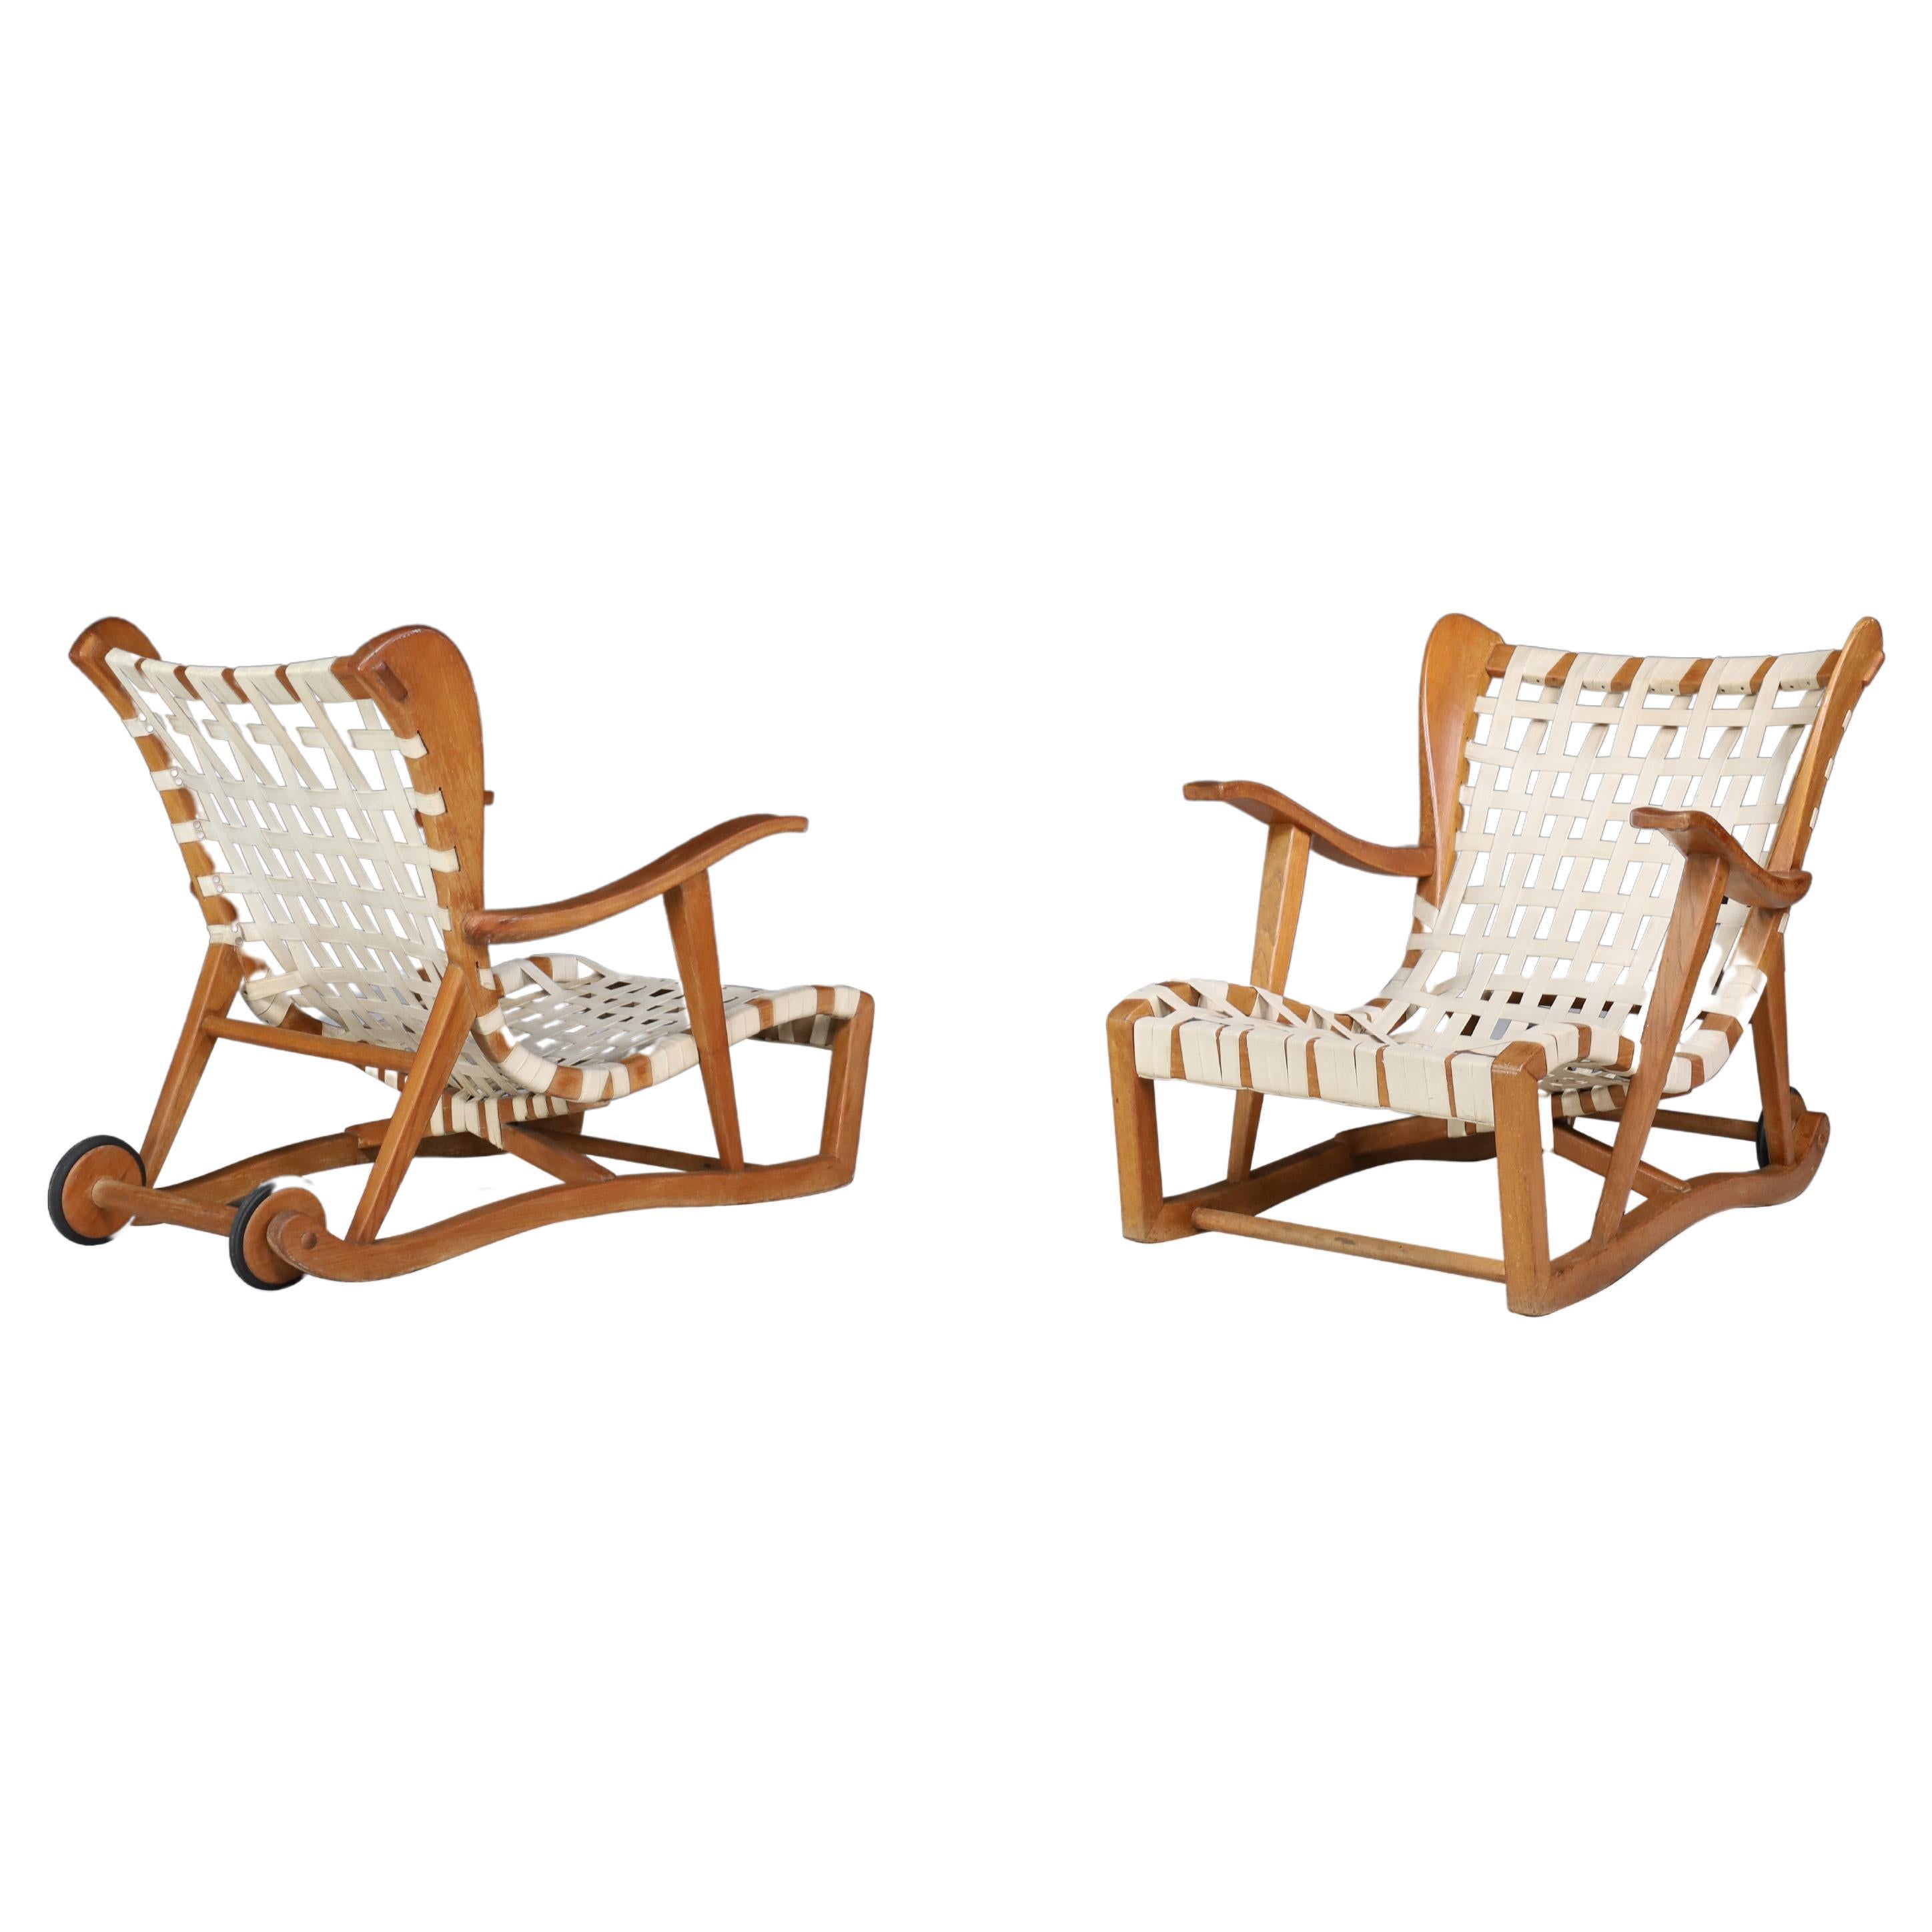 Sculptural oak Lounge chairs by Guglielmo Pecorini, Italy, the 1950s   For Sale